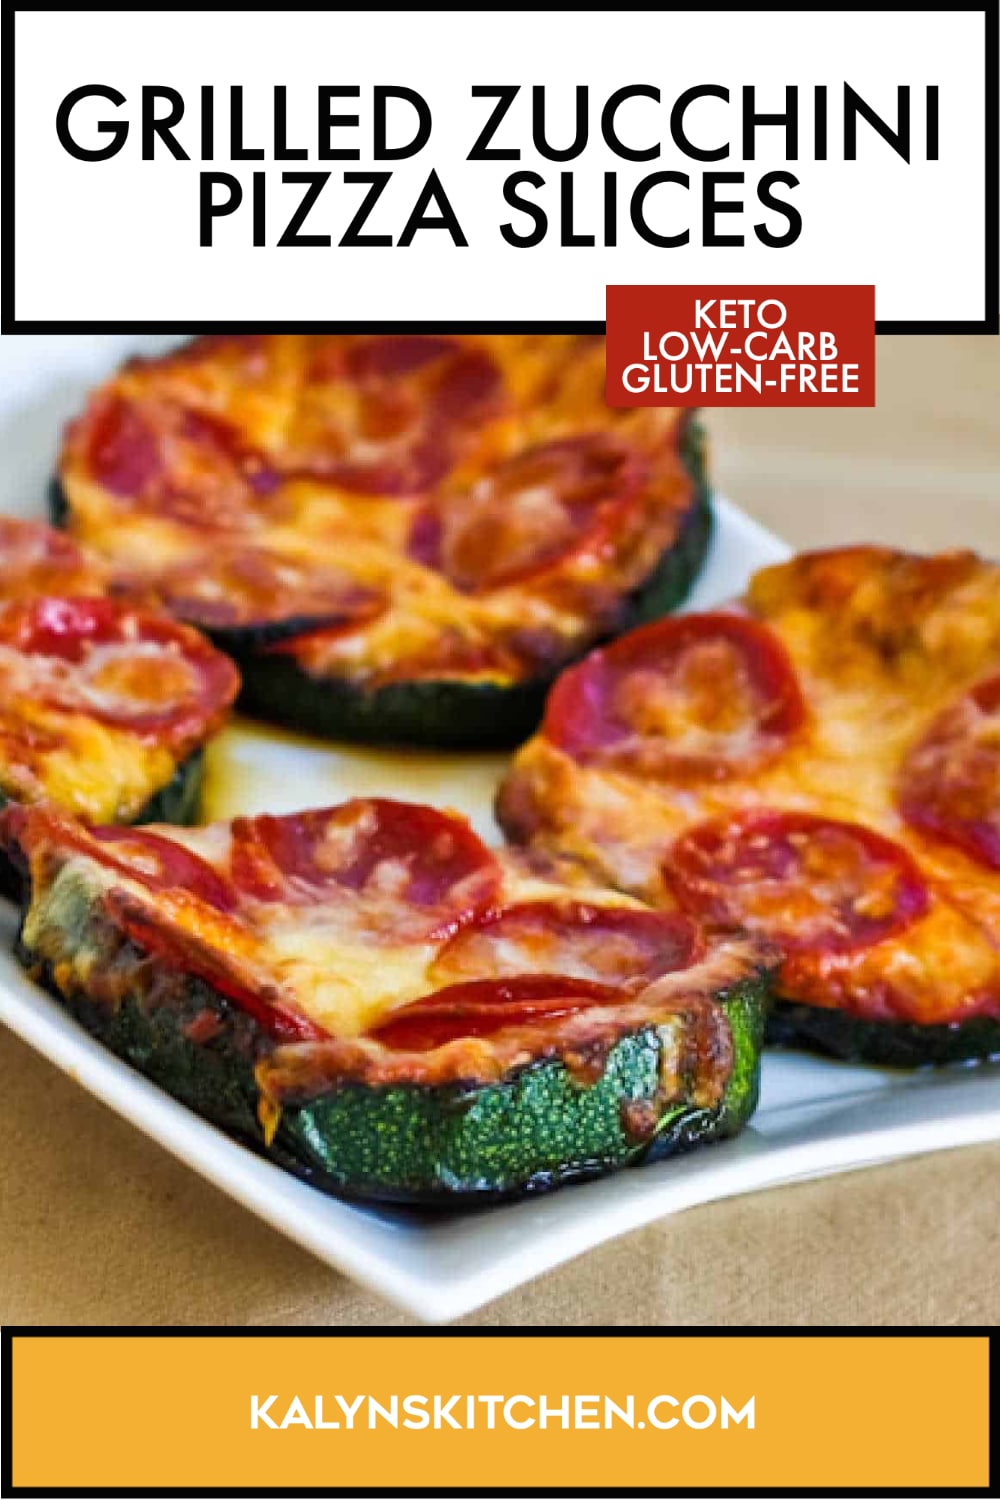 Pinterest image of Grilled Zucchini Pizza Slices